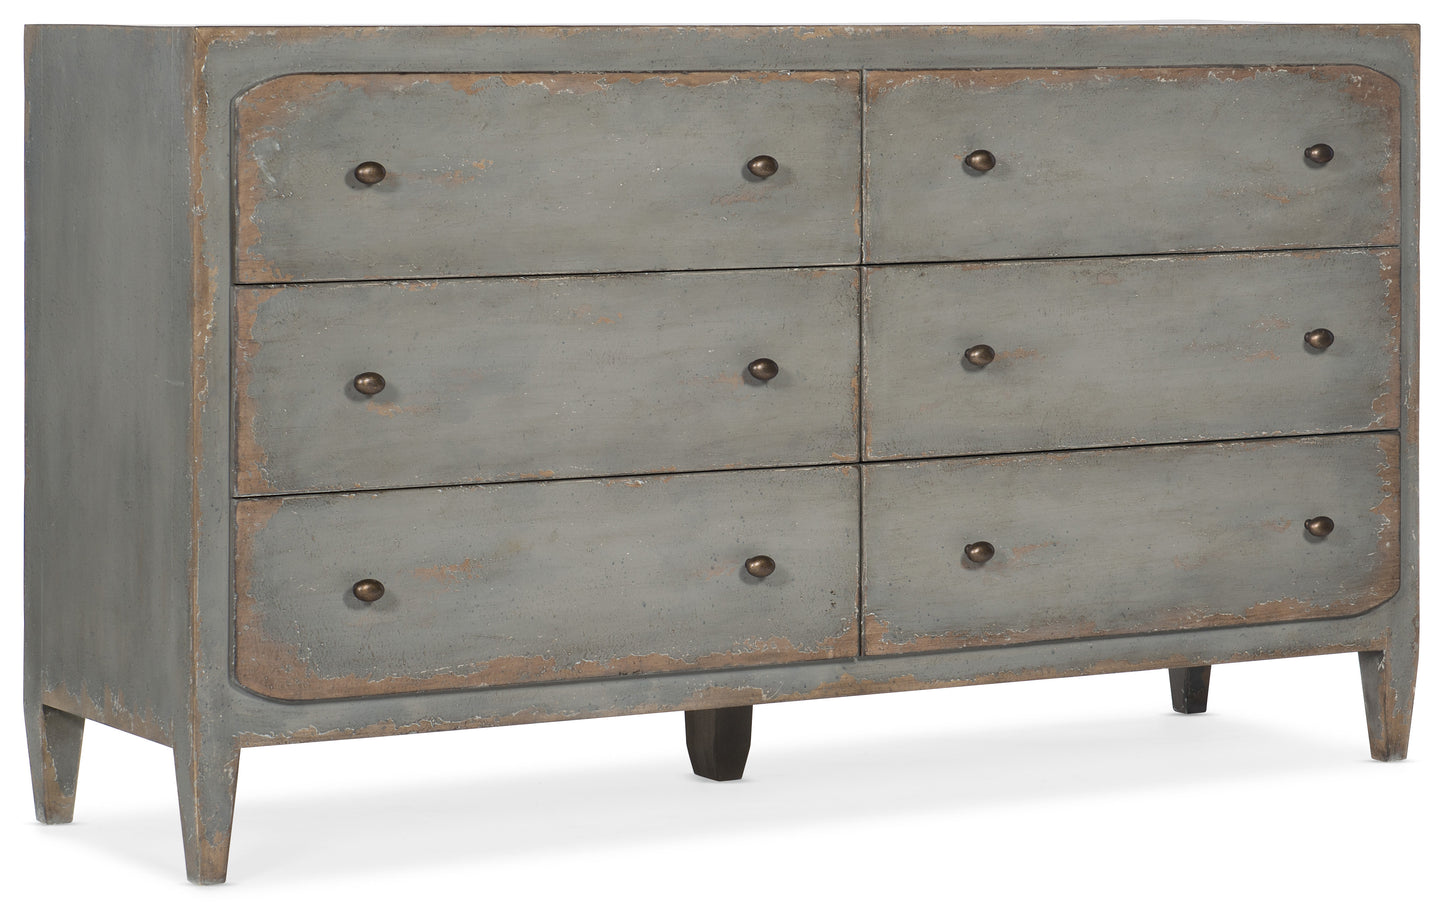 Ciao Bella Six-Drawer Dresser- Speckled Gray